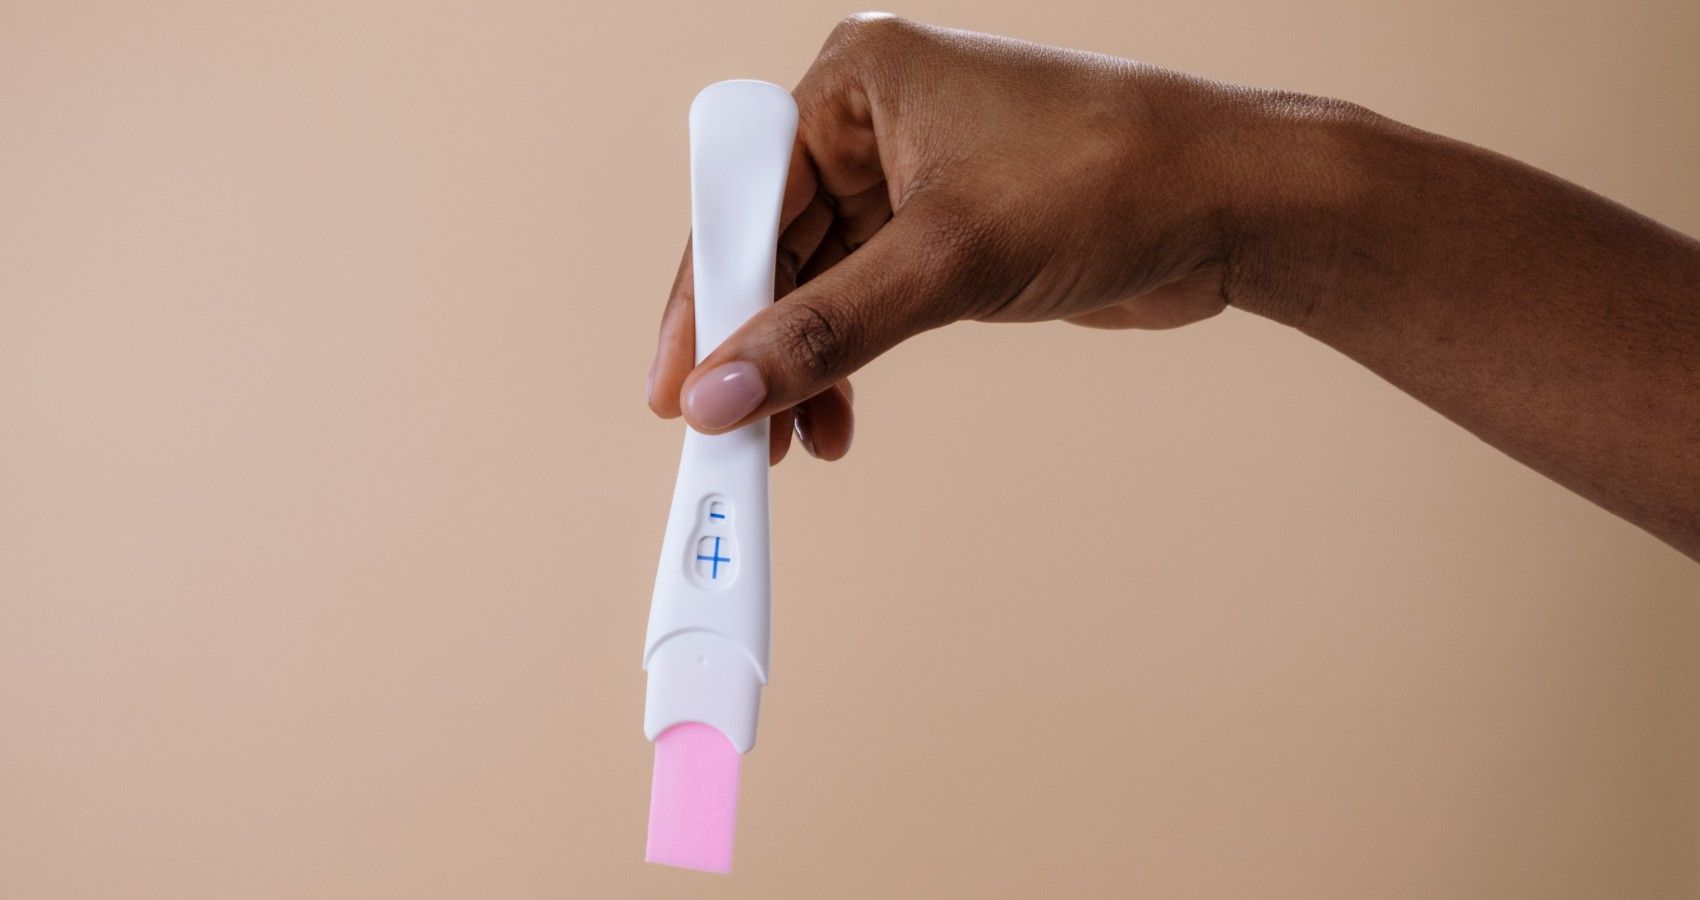 Pregnancy Test Sales Are Up Hinting At Millennial Baby Boom